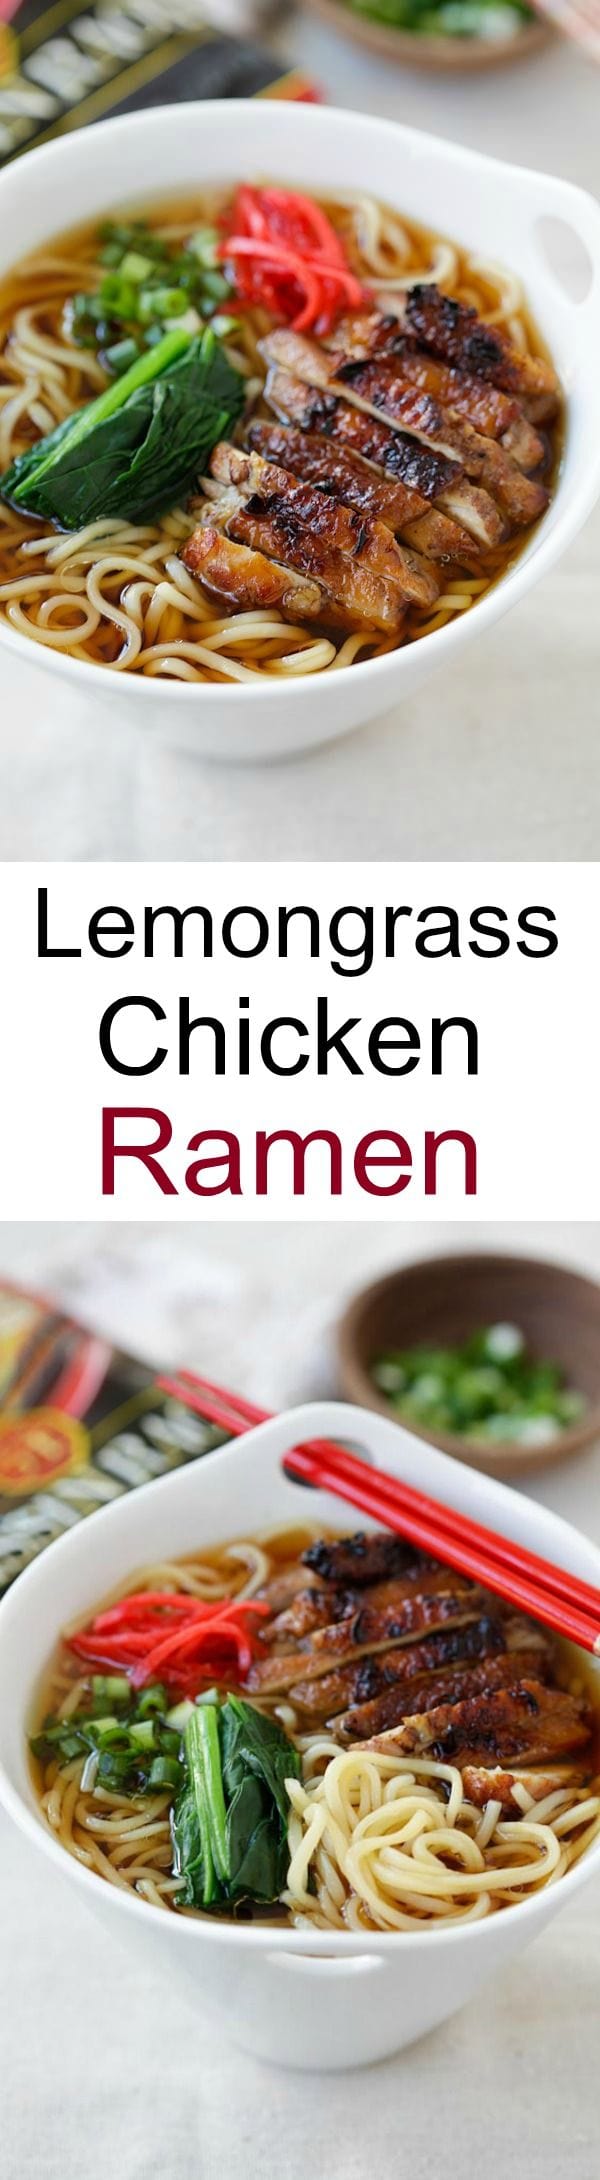 Lemongrass Chicken Soy Sauce Ramen - best instant ramen with chicken. Homemade, easy, simple with Nissin RAOH ramen. So quick and good | rasamalaysia.com